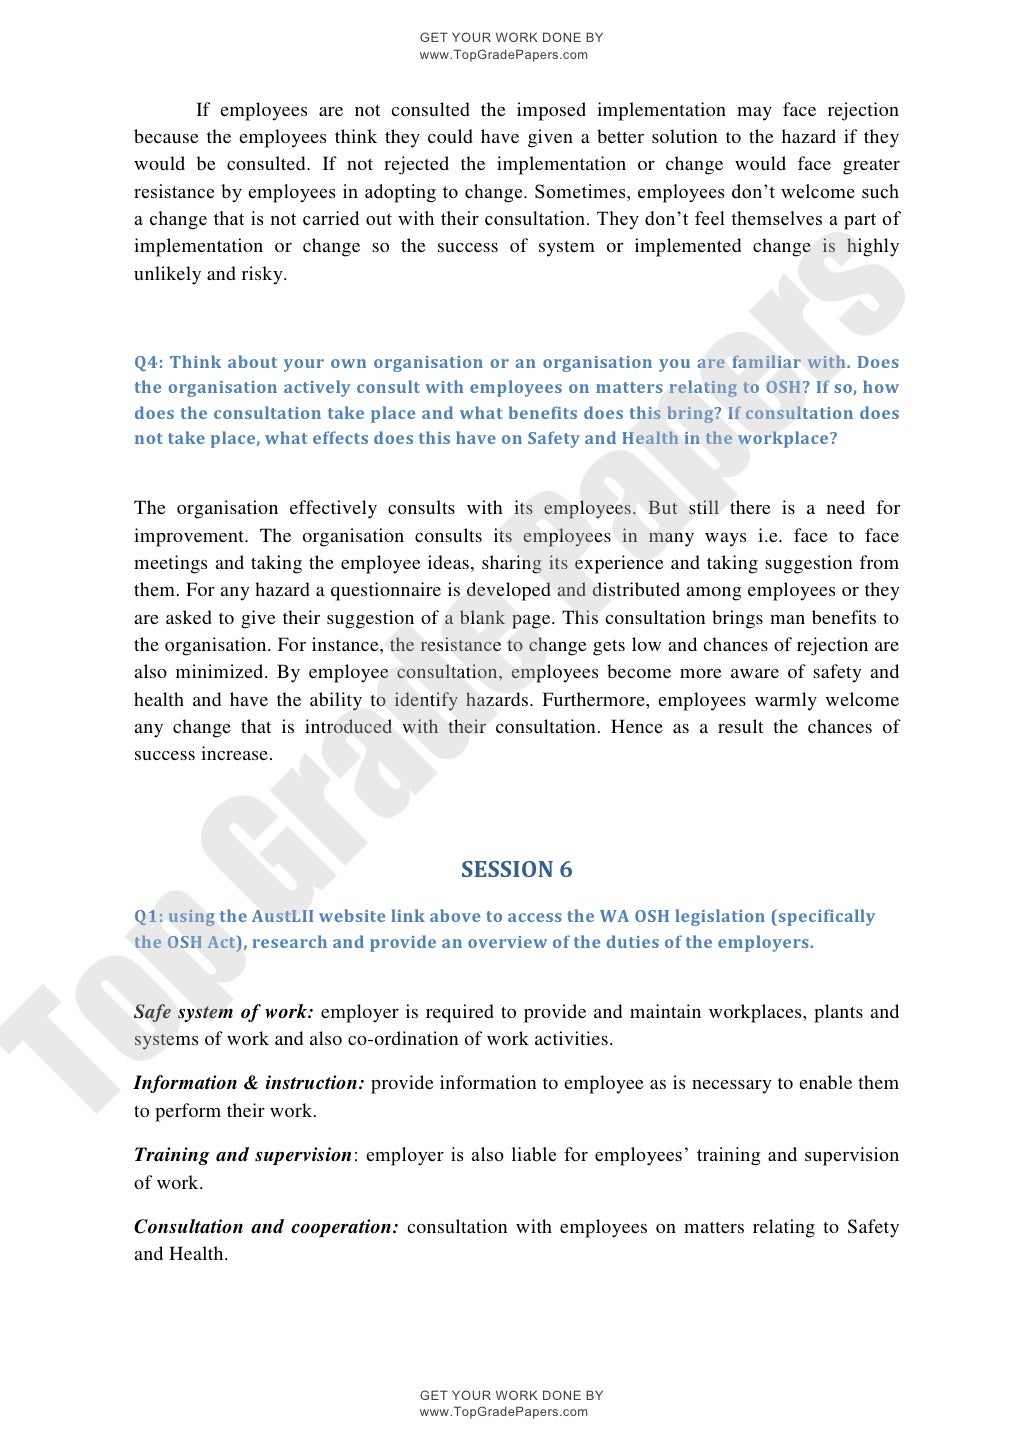 essay on importance of occupational health and safety